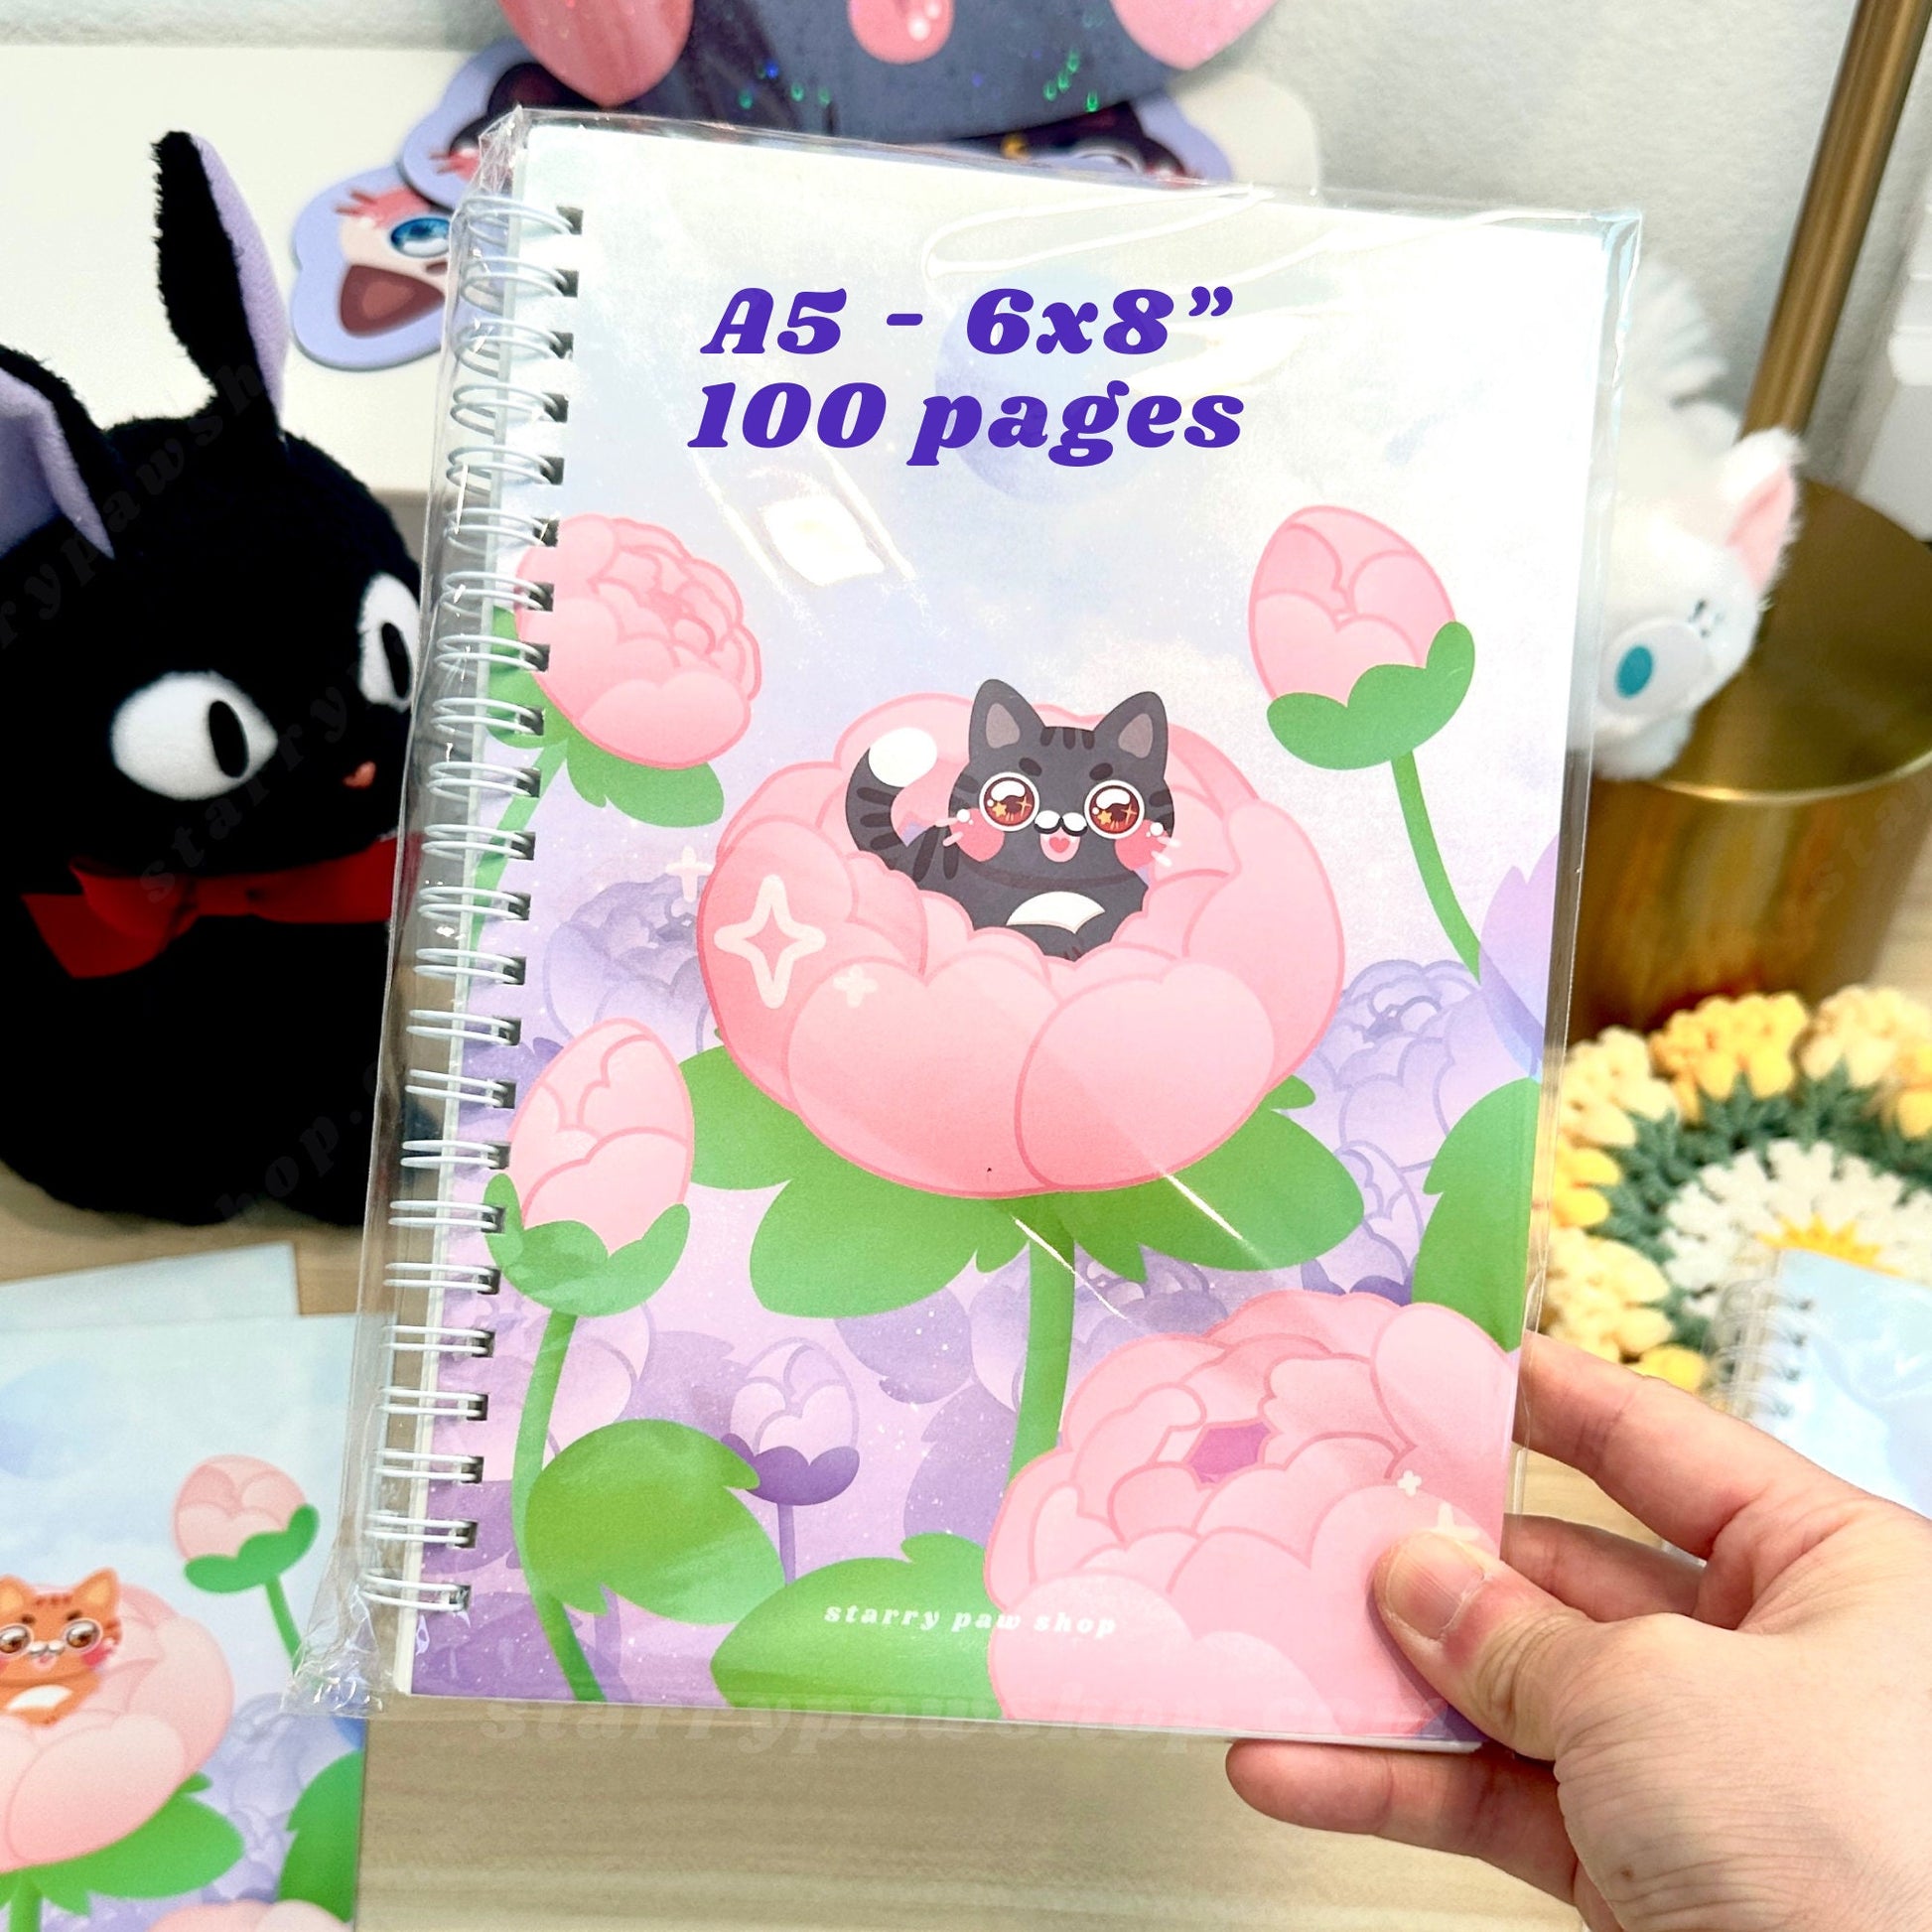 Boba Reusable Sticker Book in Black Cat or Brown Tabby Cat | A5 5.8 x 8" 100 pages sticker paper